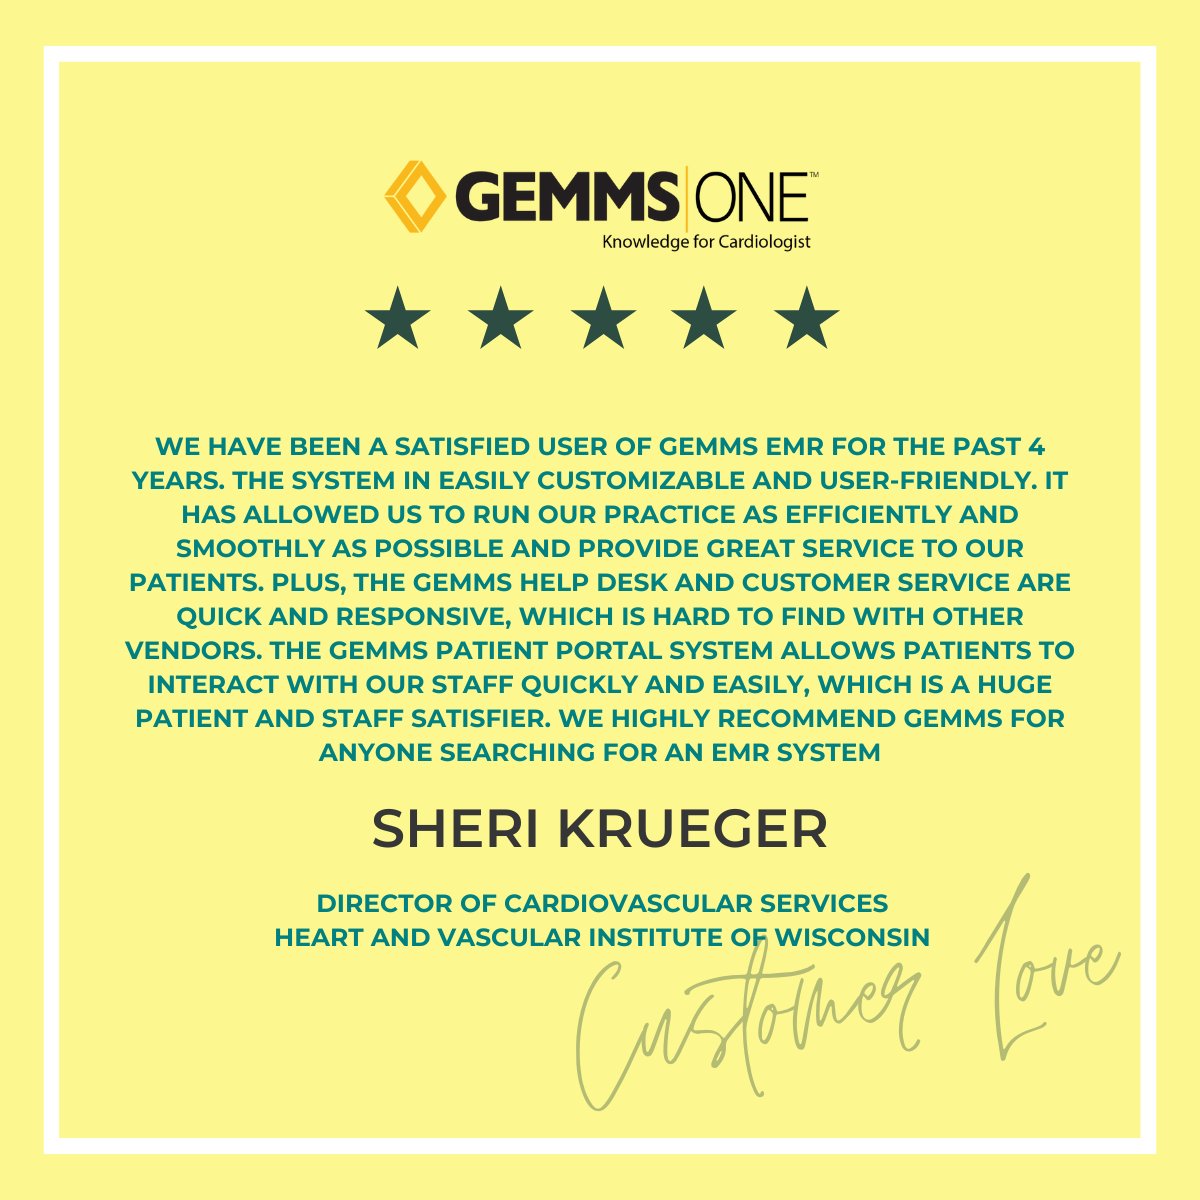 Experience Excellence in Every Update 🚀✨! GEMMS One software evolves with precision, integrating third-party enhancements seamlessly. Our upgrades ensure regulatory compliance, backed by robust documentation.

Learn more: gemmsone.com

#Testimonials #HappyCustomer